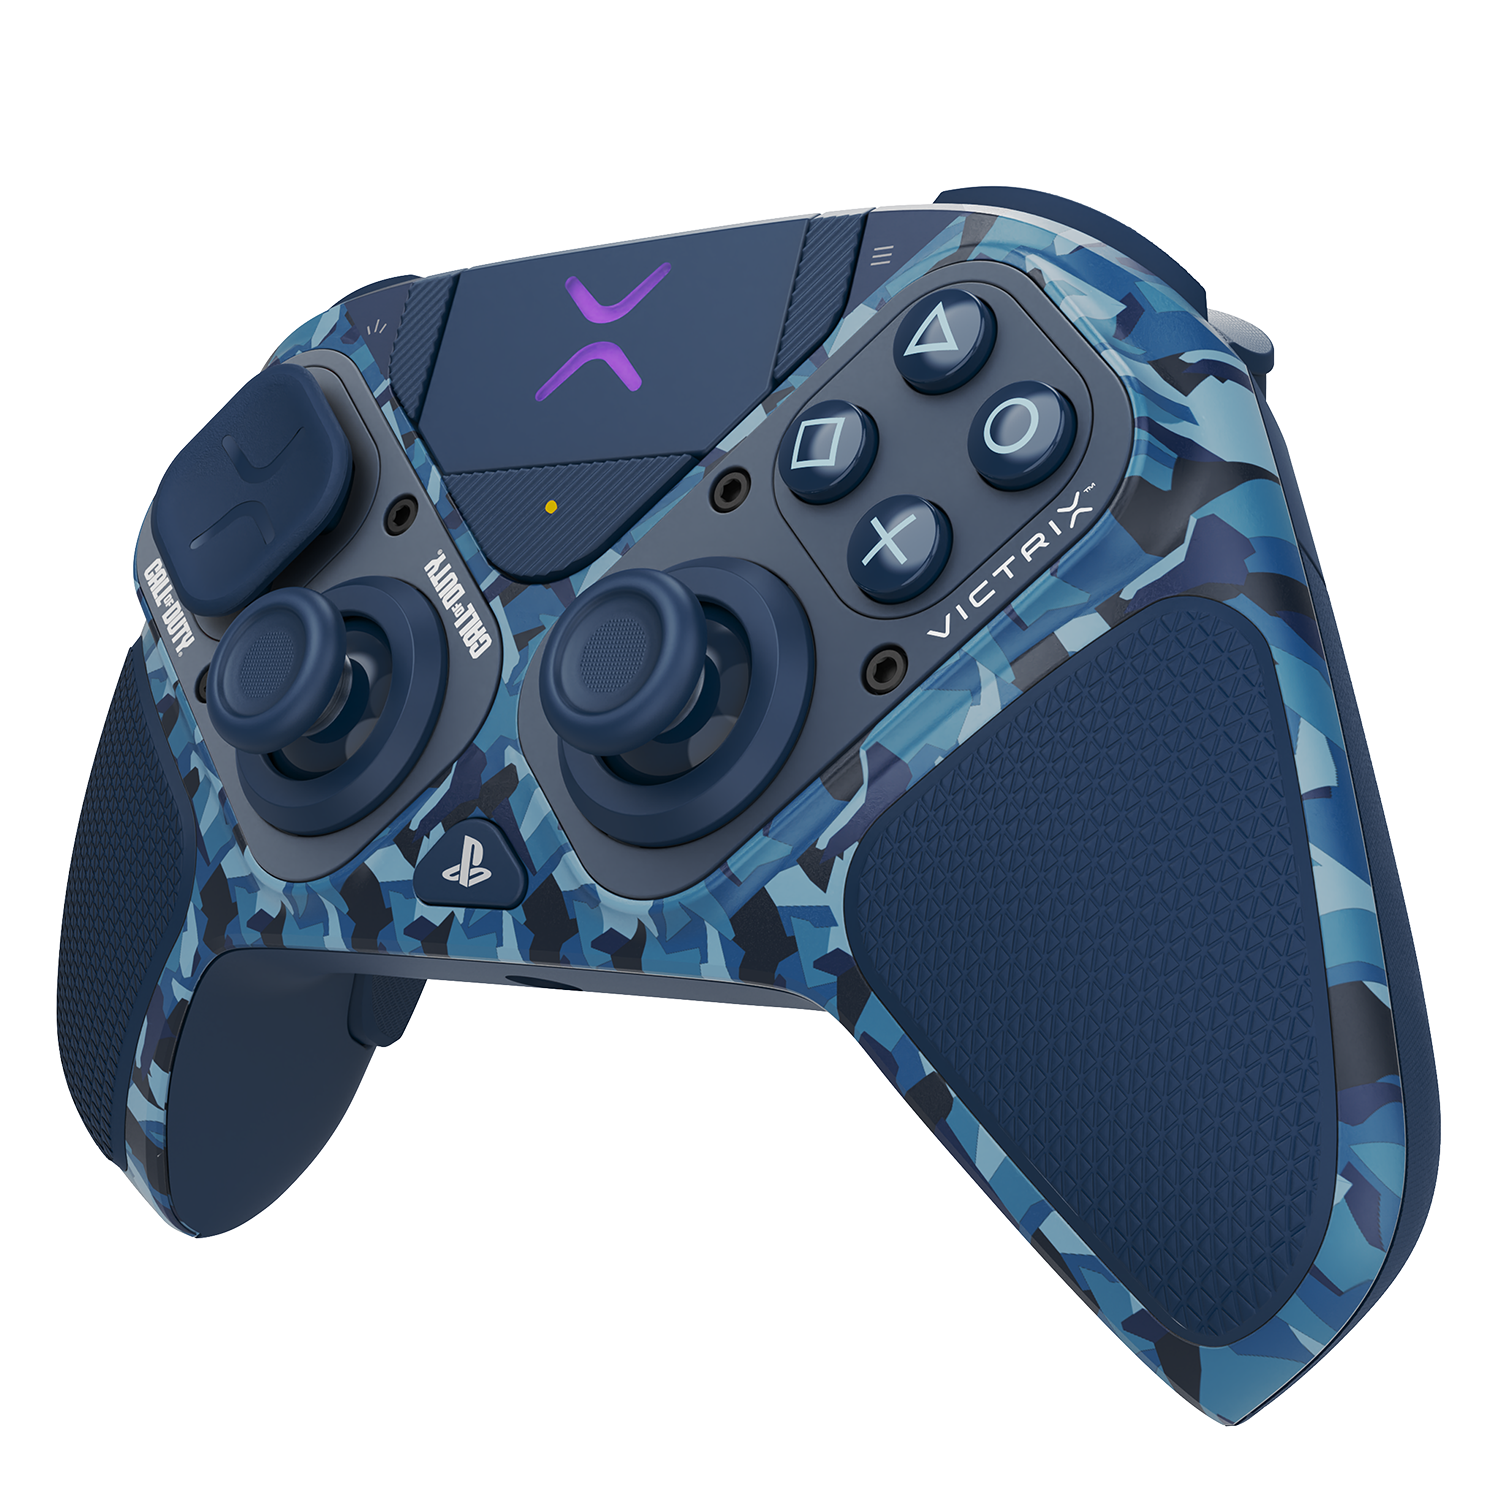 PS5, PS4 & PC Victrix Pro BFG Wireless Controller